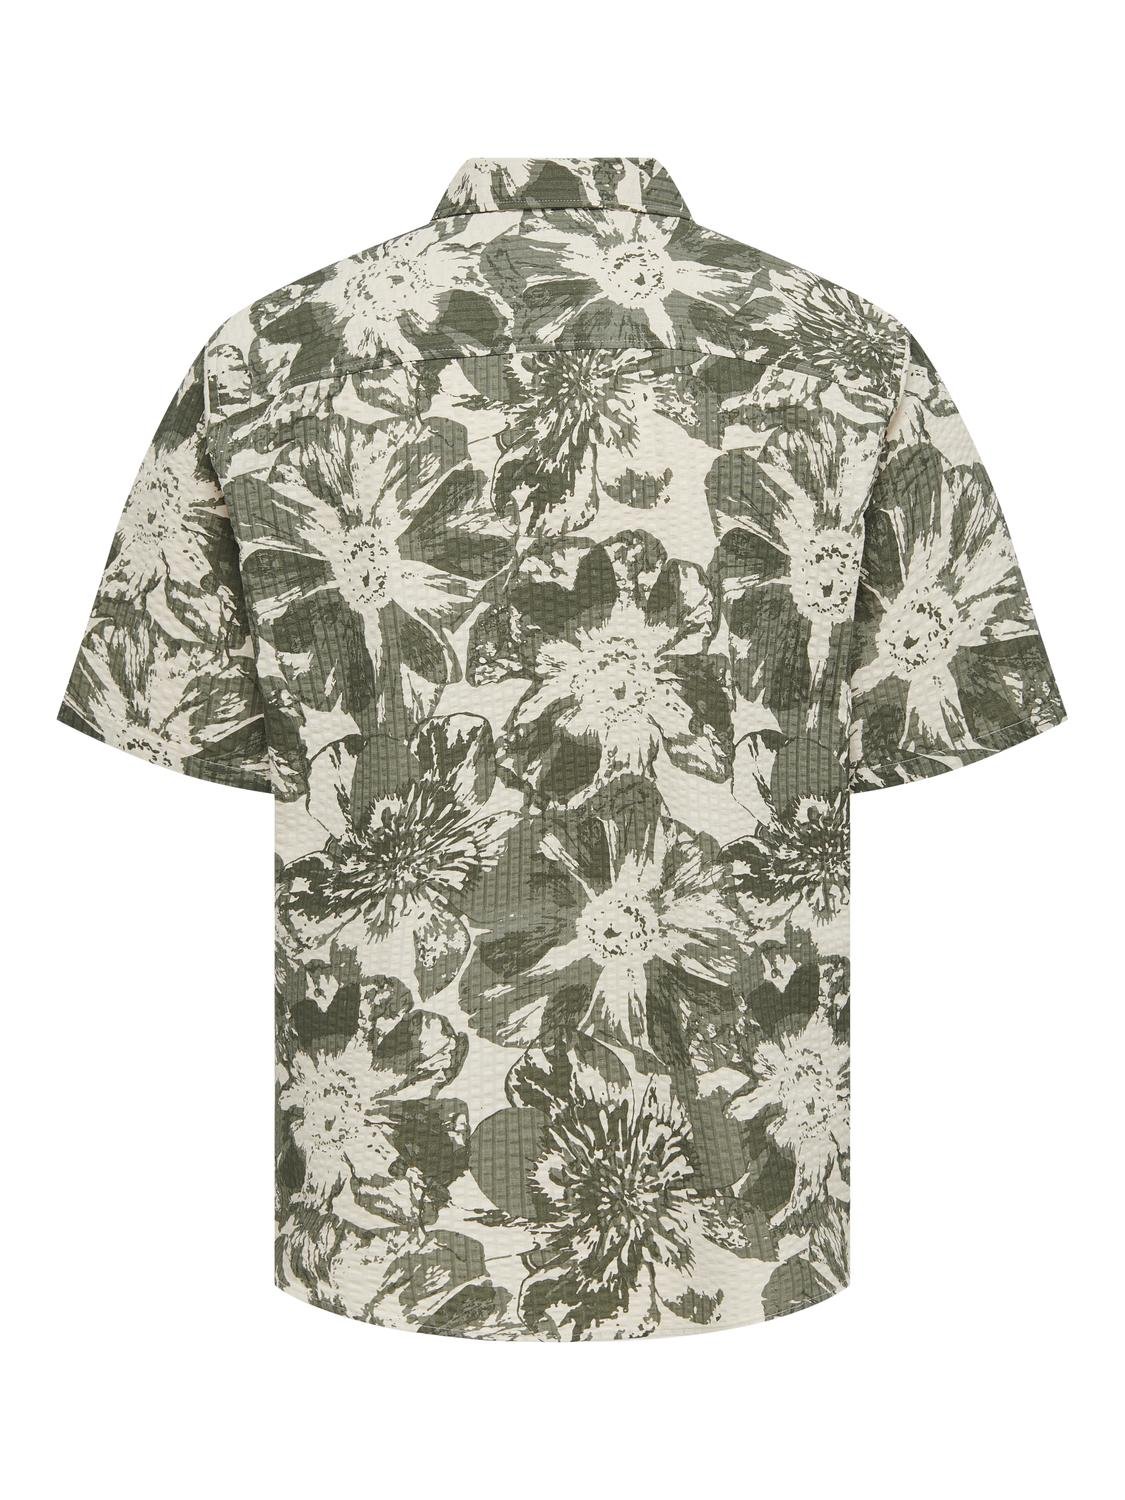 ONLY & SONS Short sleeved shirt with pattern -Silver Lining - 22028356